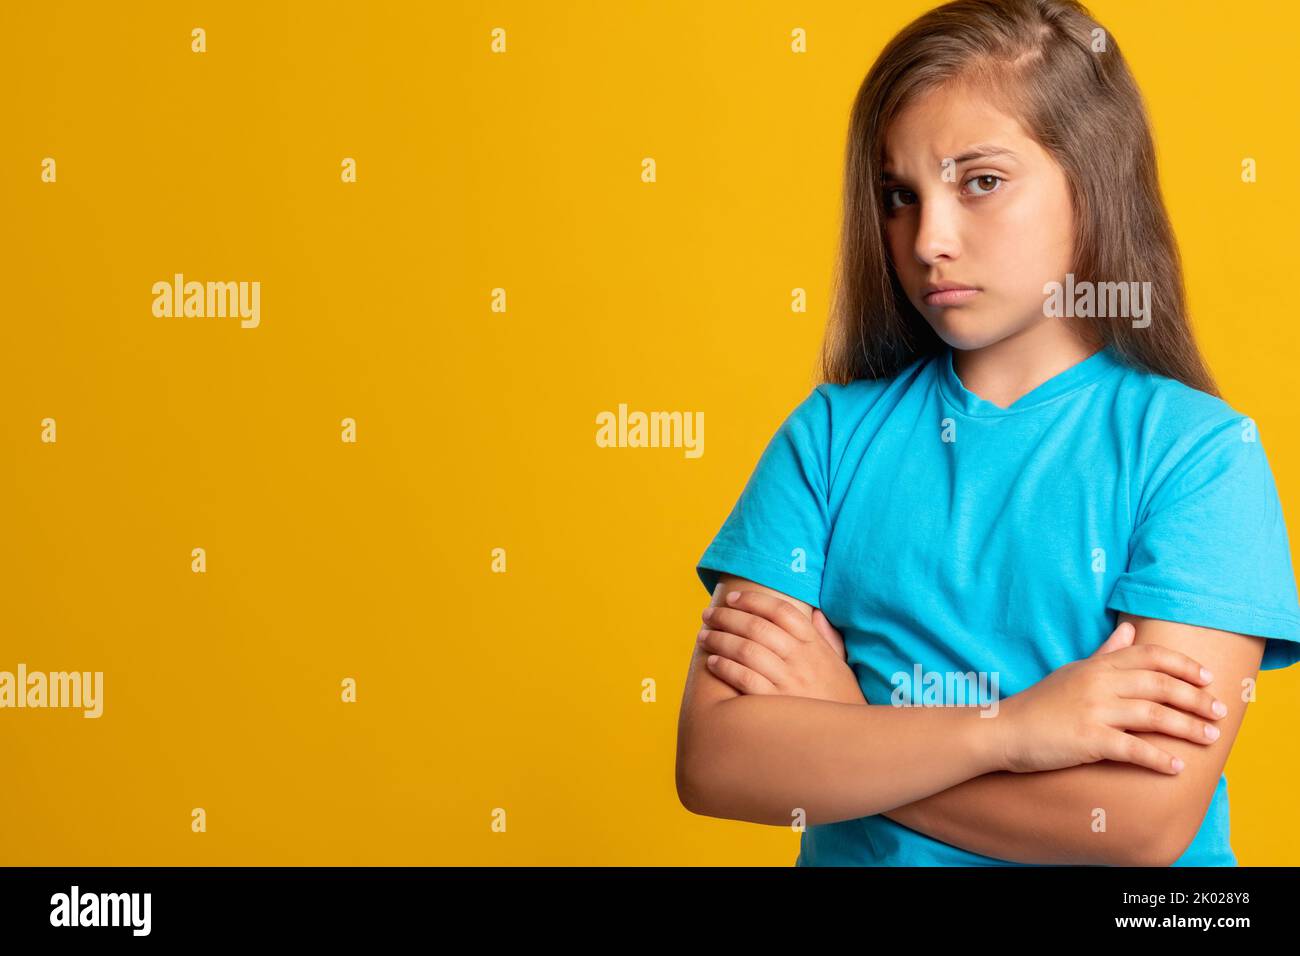 disappointed child mistake regret disagreement Stock Photo